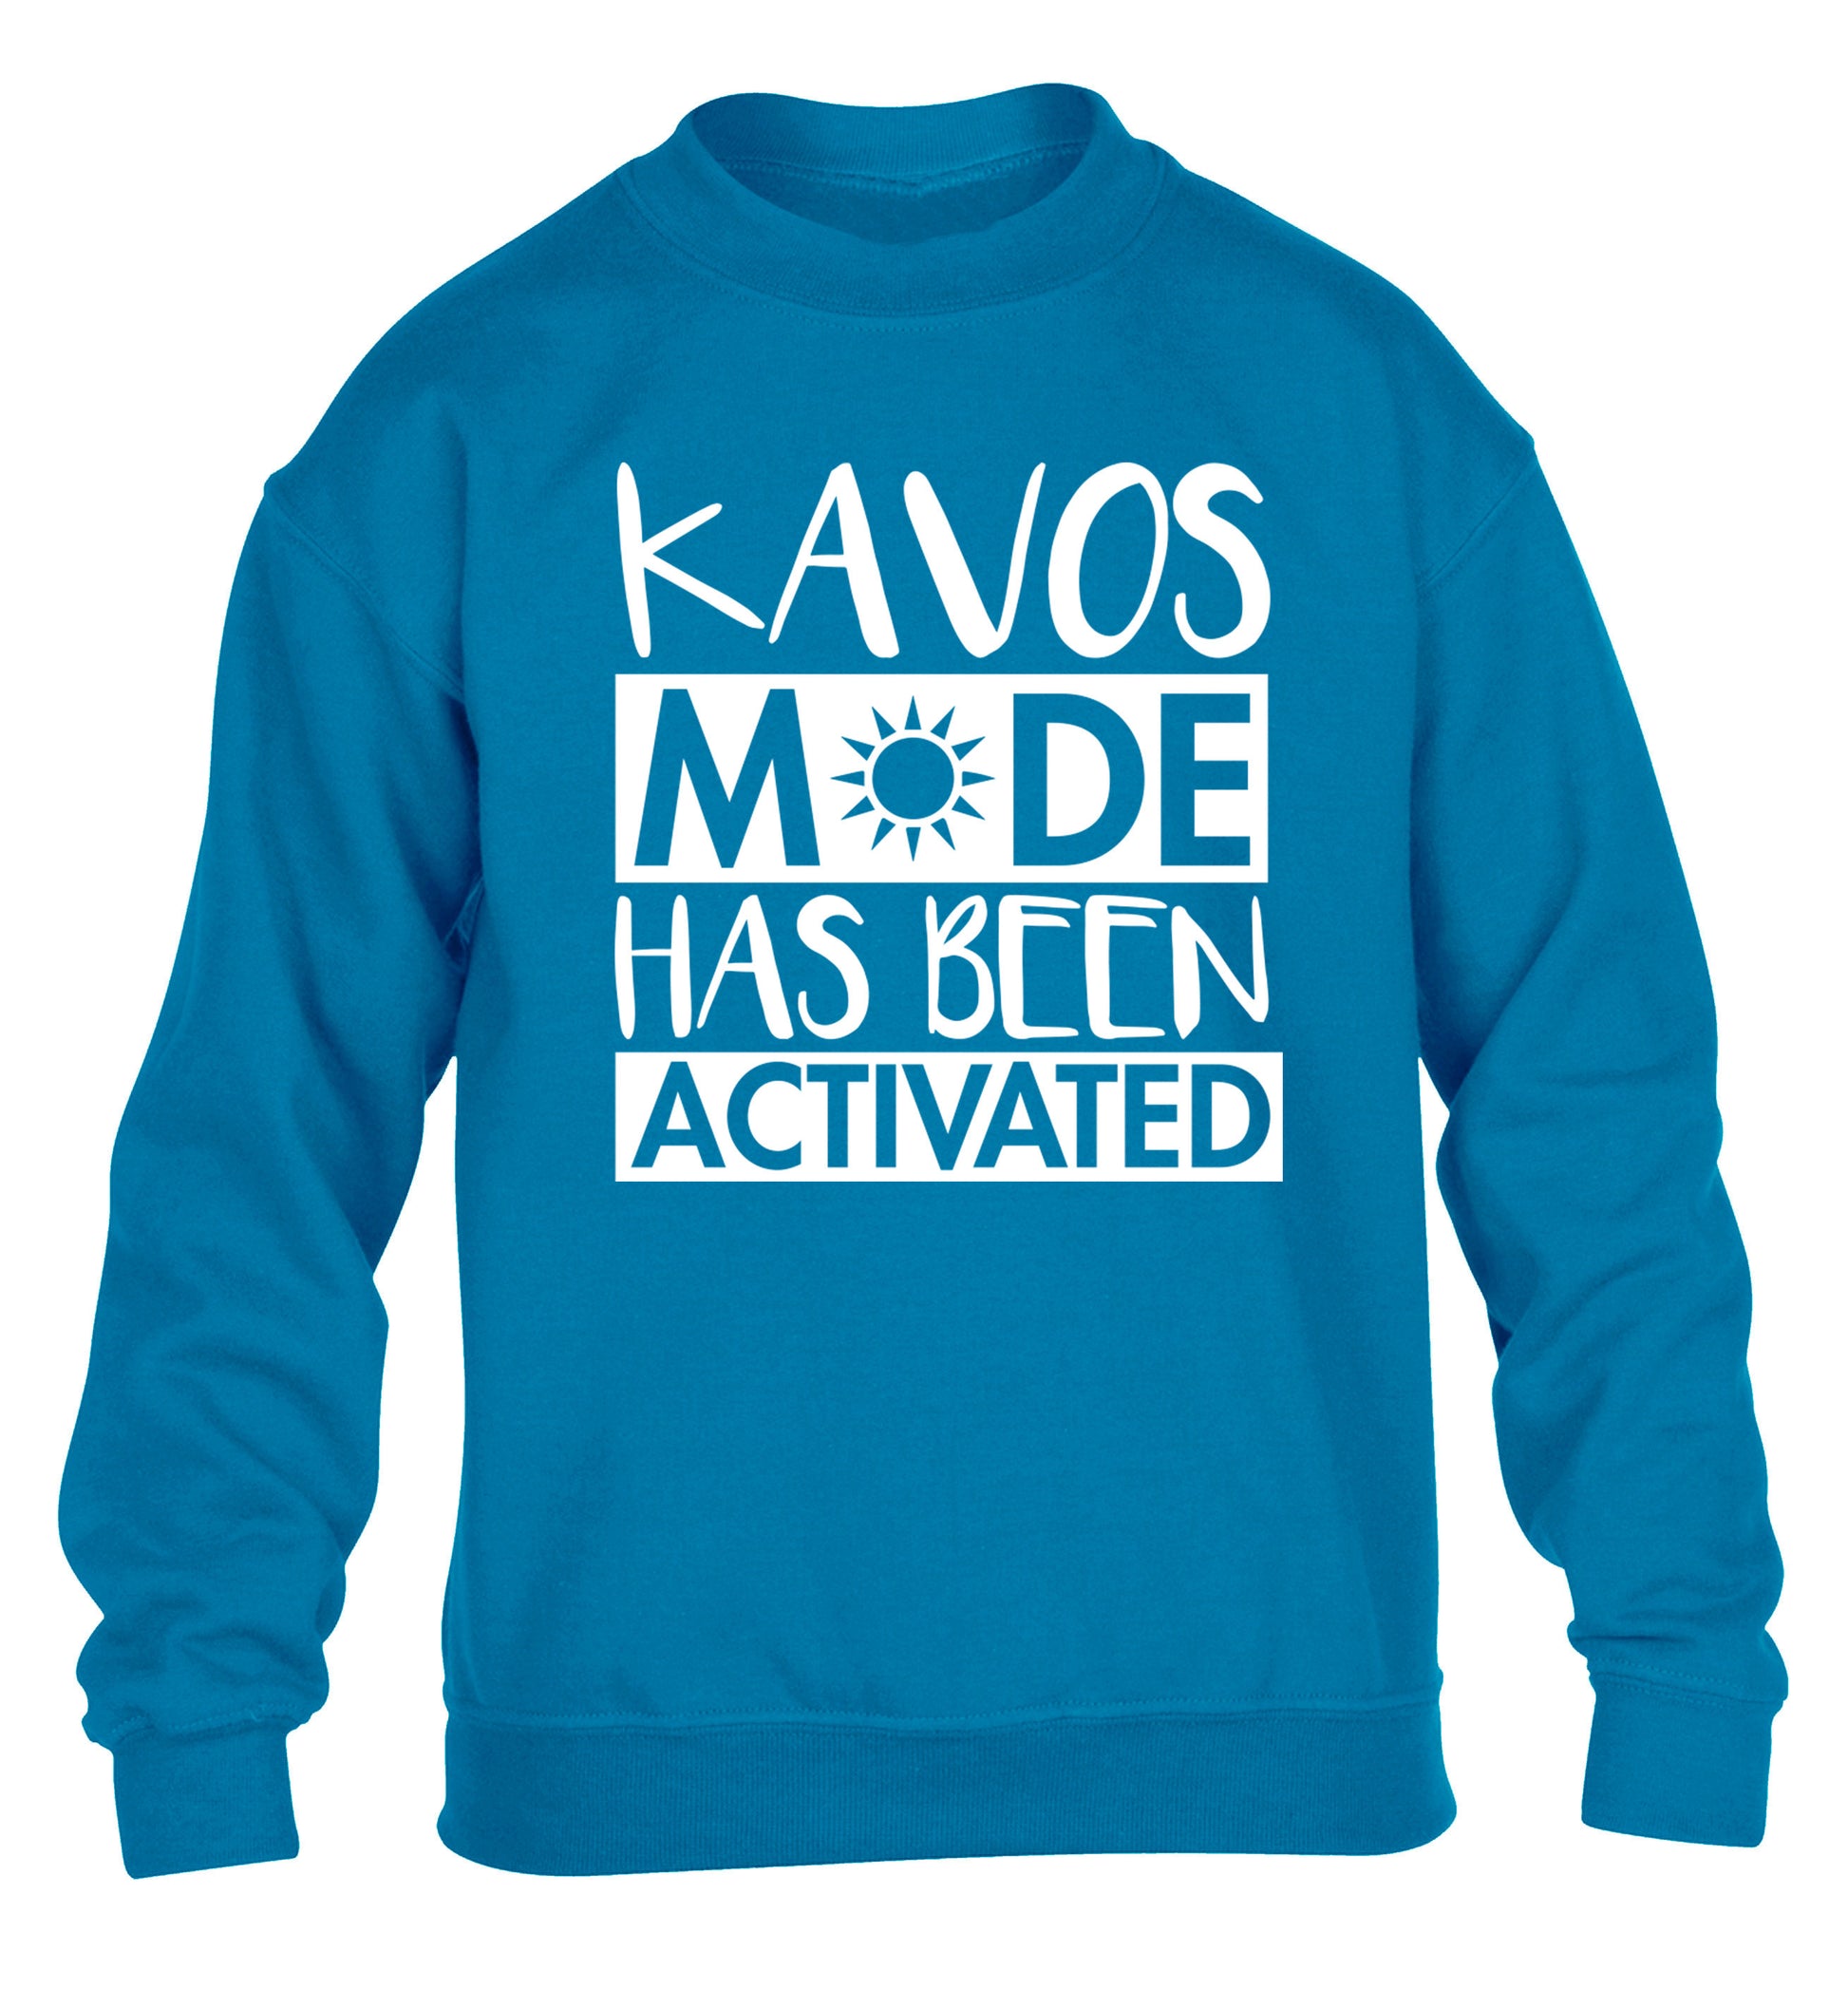 Kavos mode has been activated children's blue sweater 12-14 Years